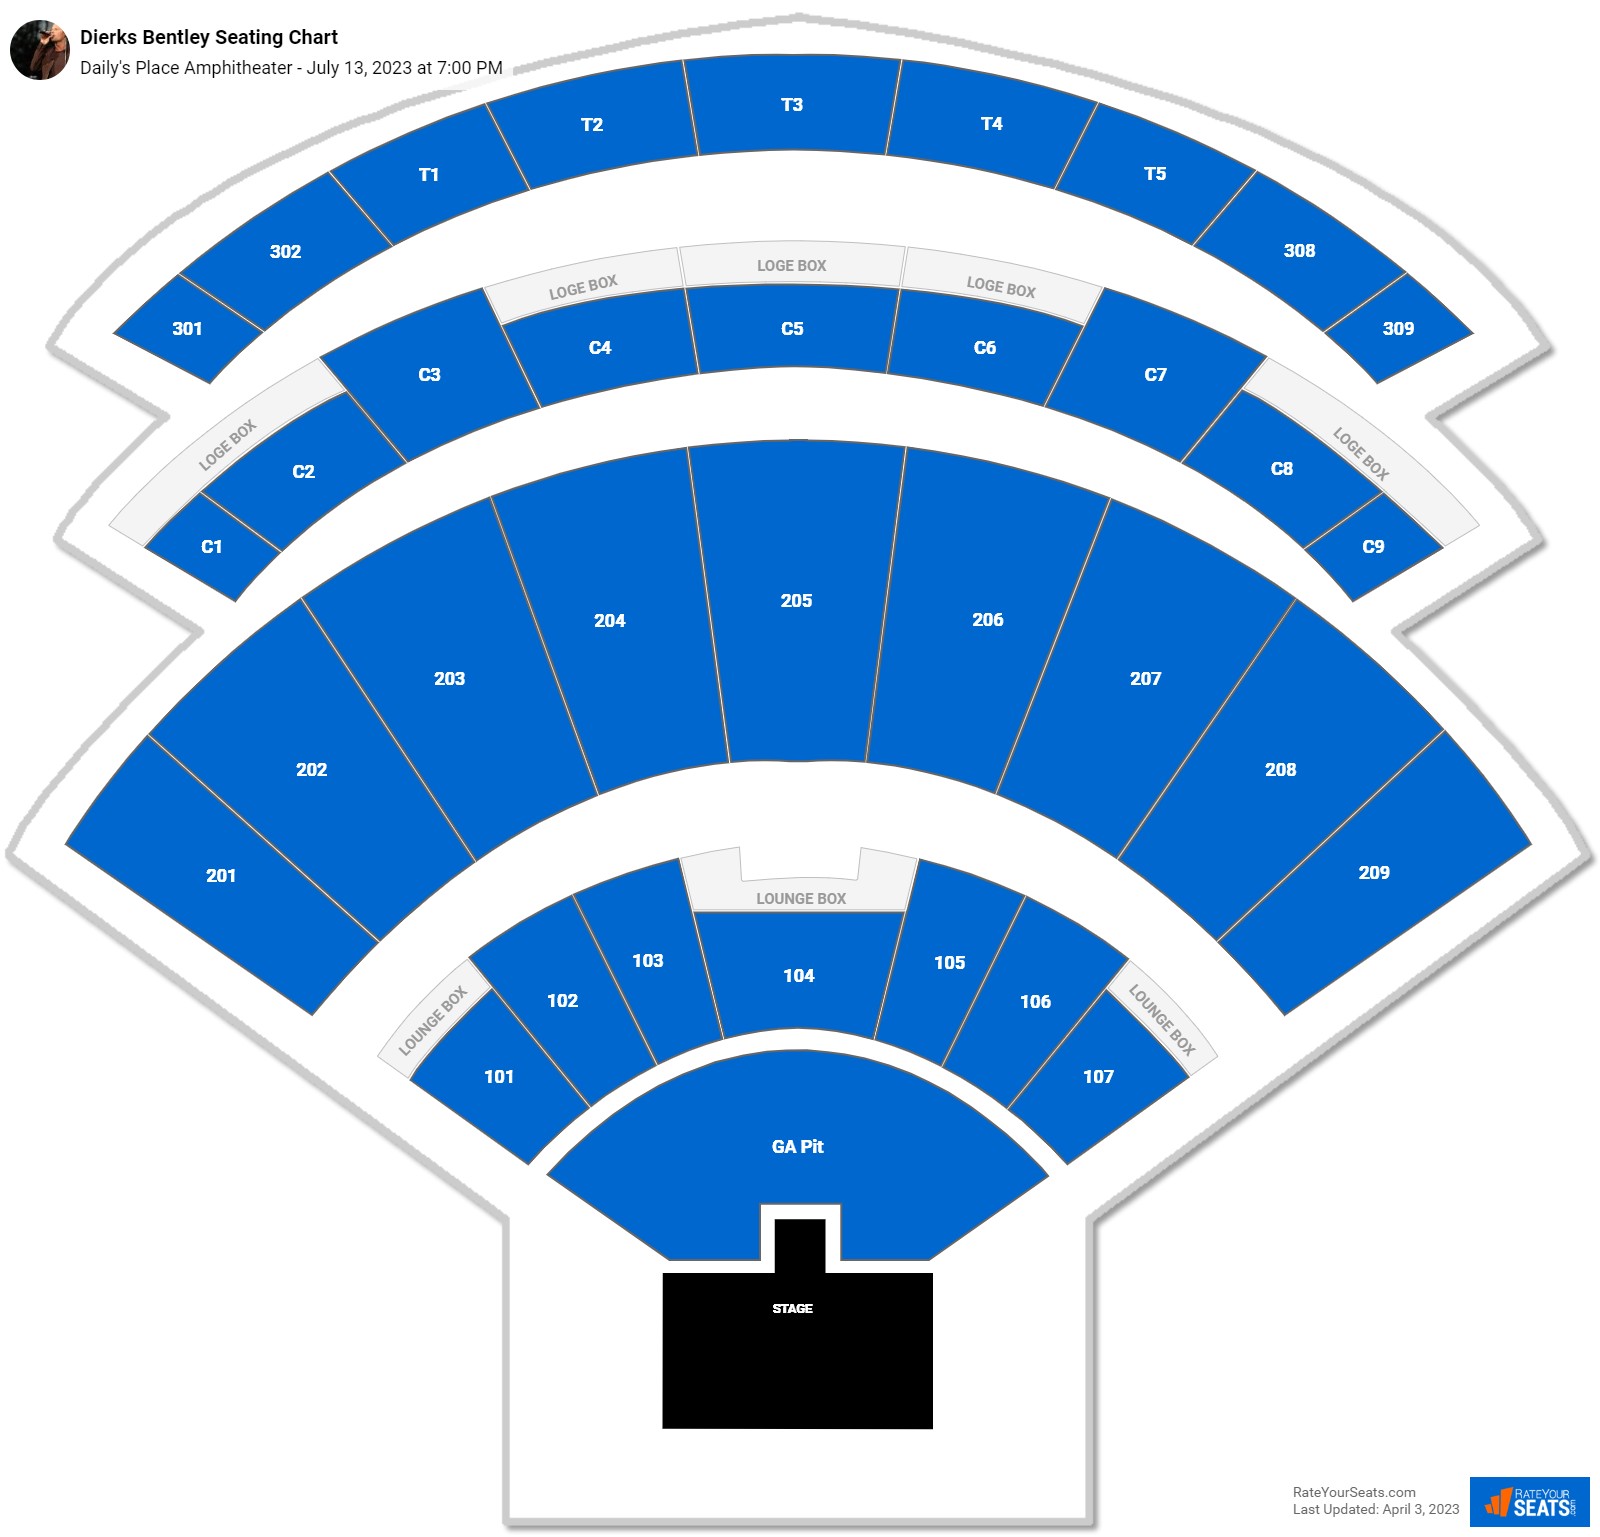 Daily's Place Amphitheater Seating Chart - RateYourSeats.com